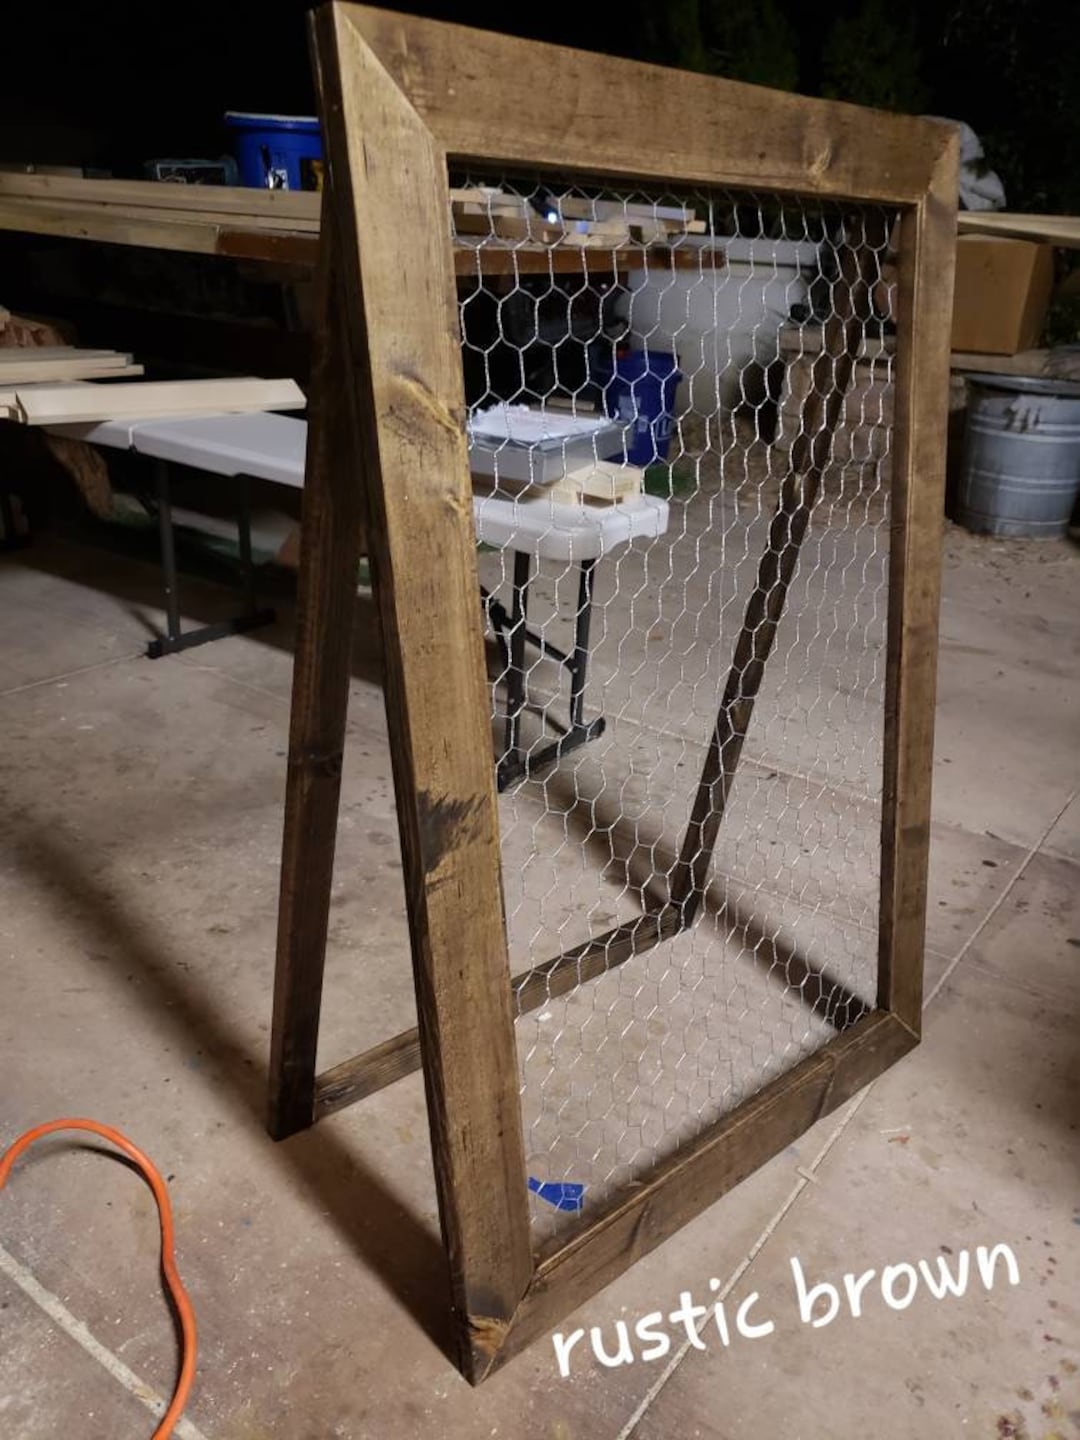 Unfinished Wood Chicken Wire Frame - Ready to Decorate, Add Photos,  Collages, Jewelry and More - Measures 9.5 x 11.5 Inside 8x10 | 1 Pack